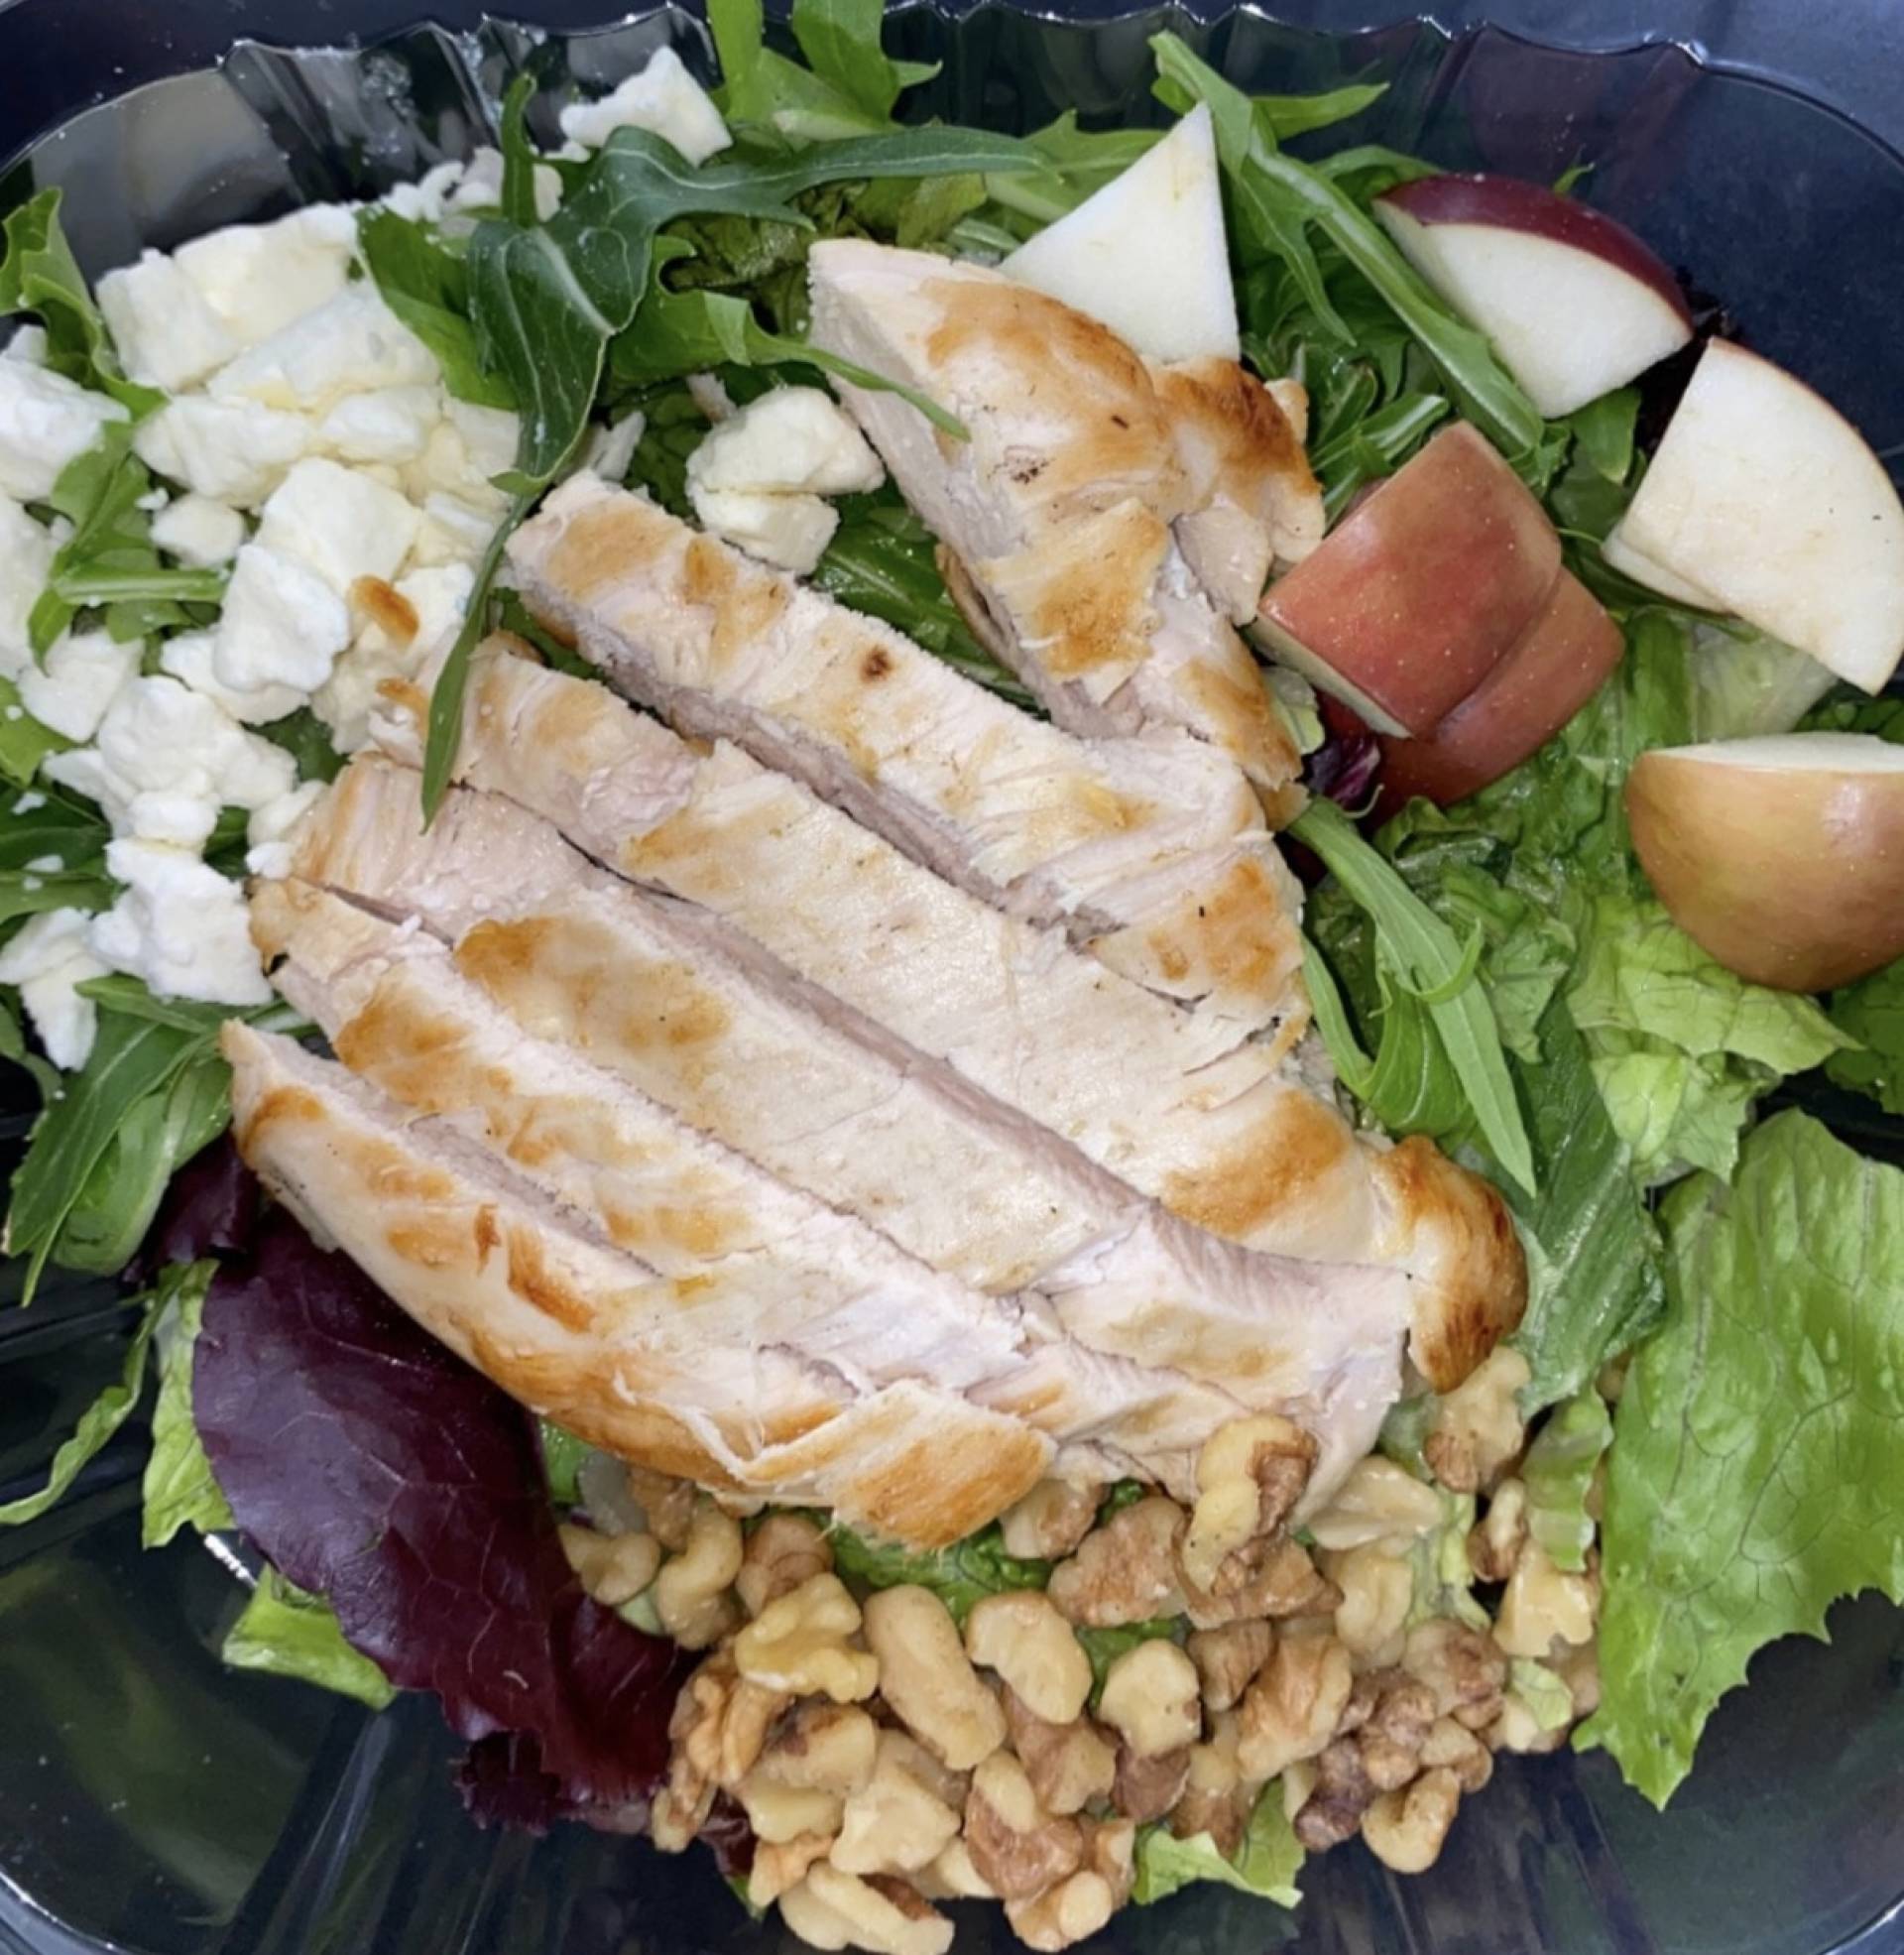 Apple and Walnut Salad with Grilled Chicken